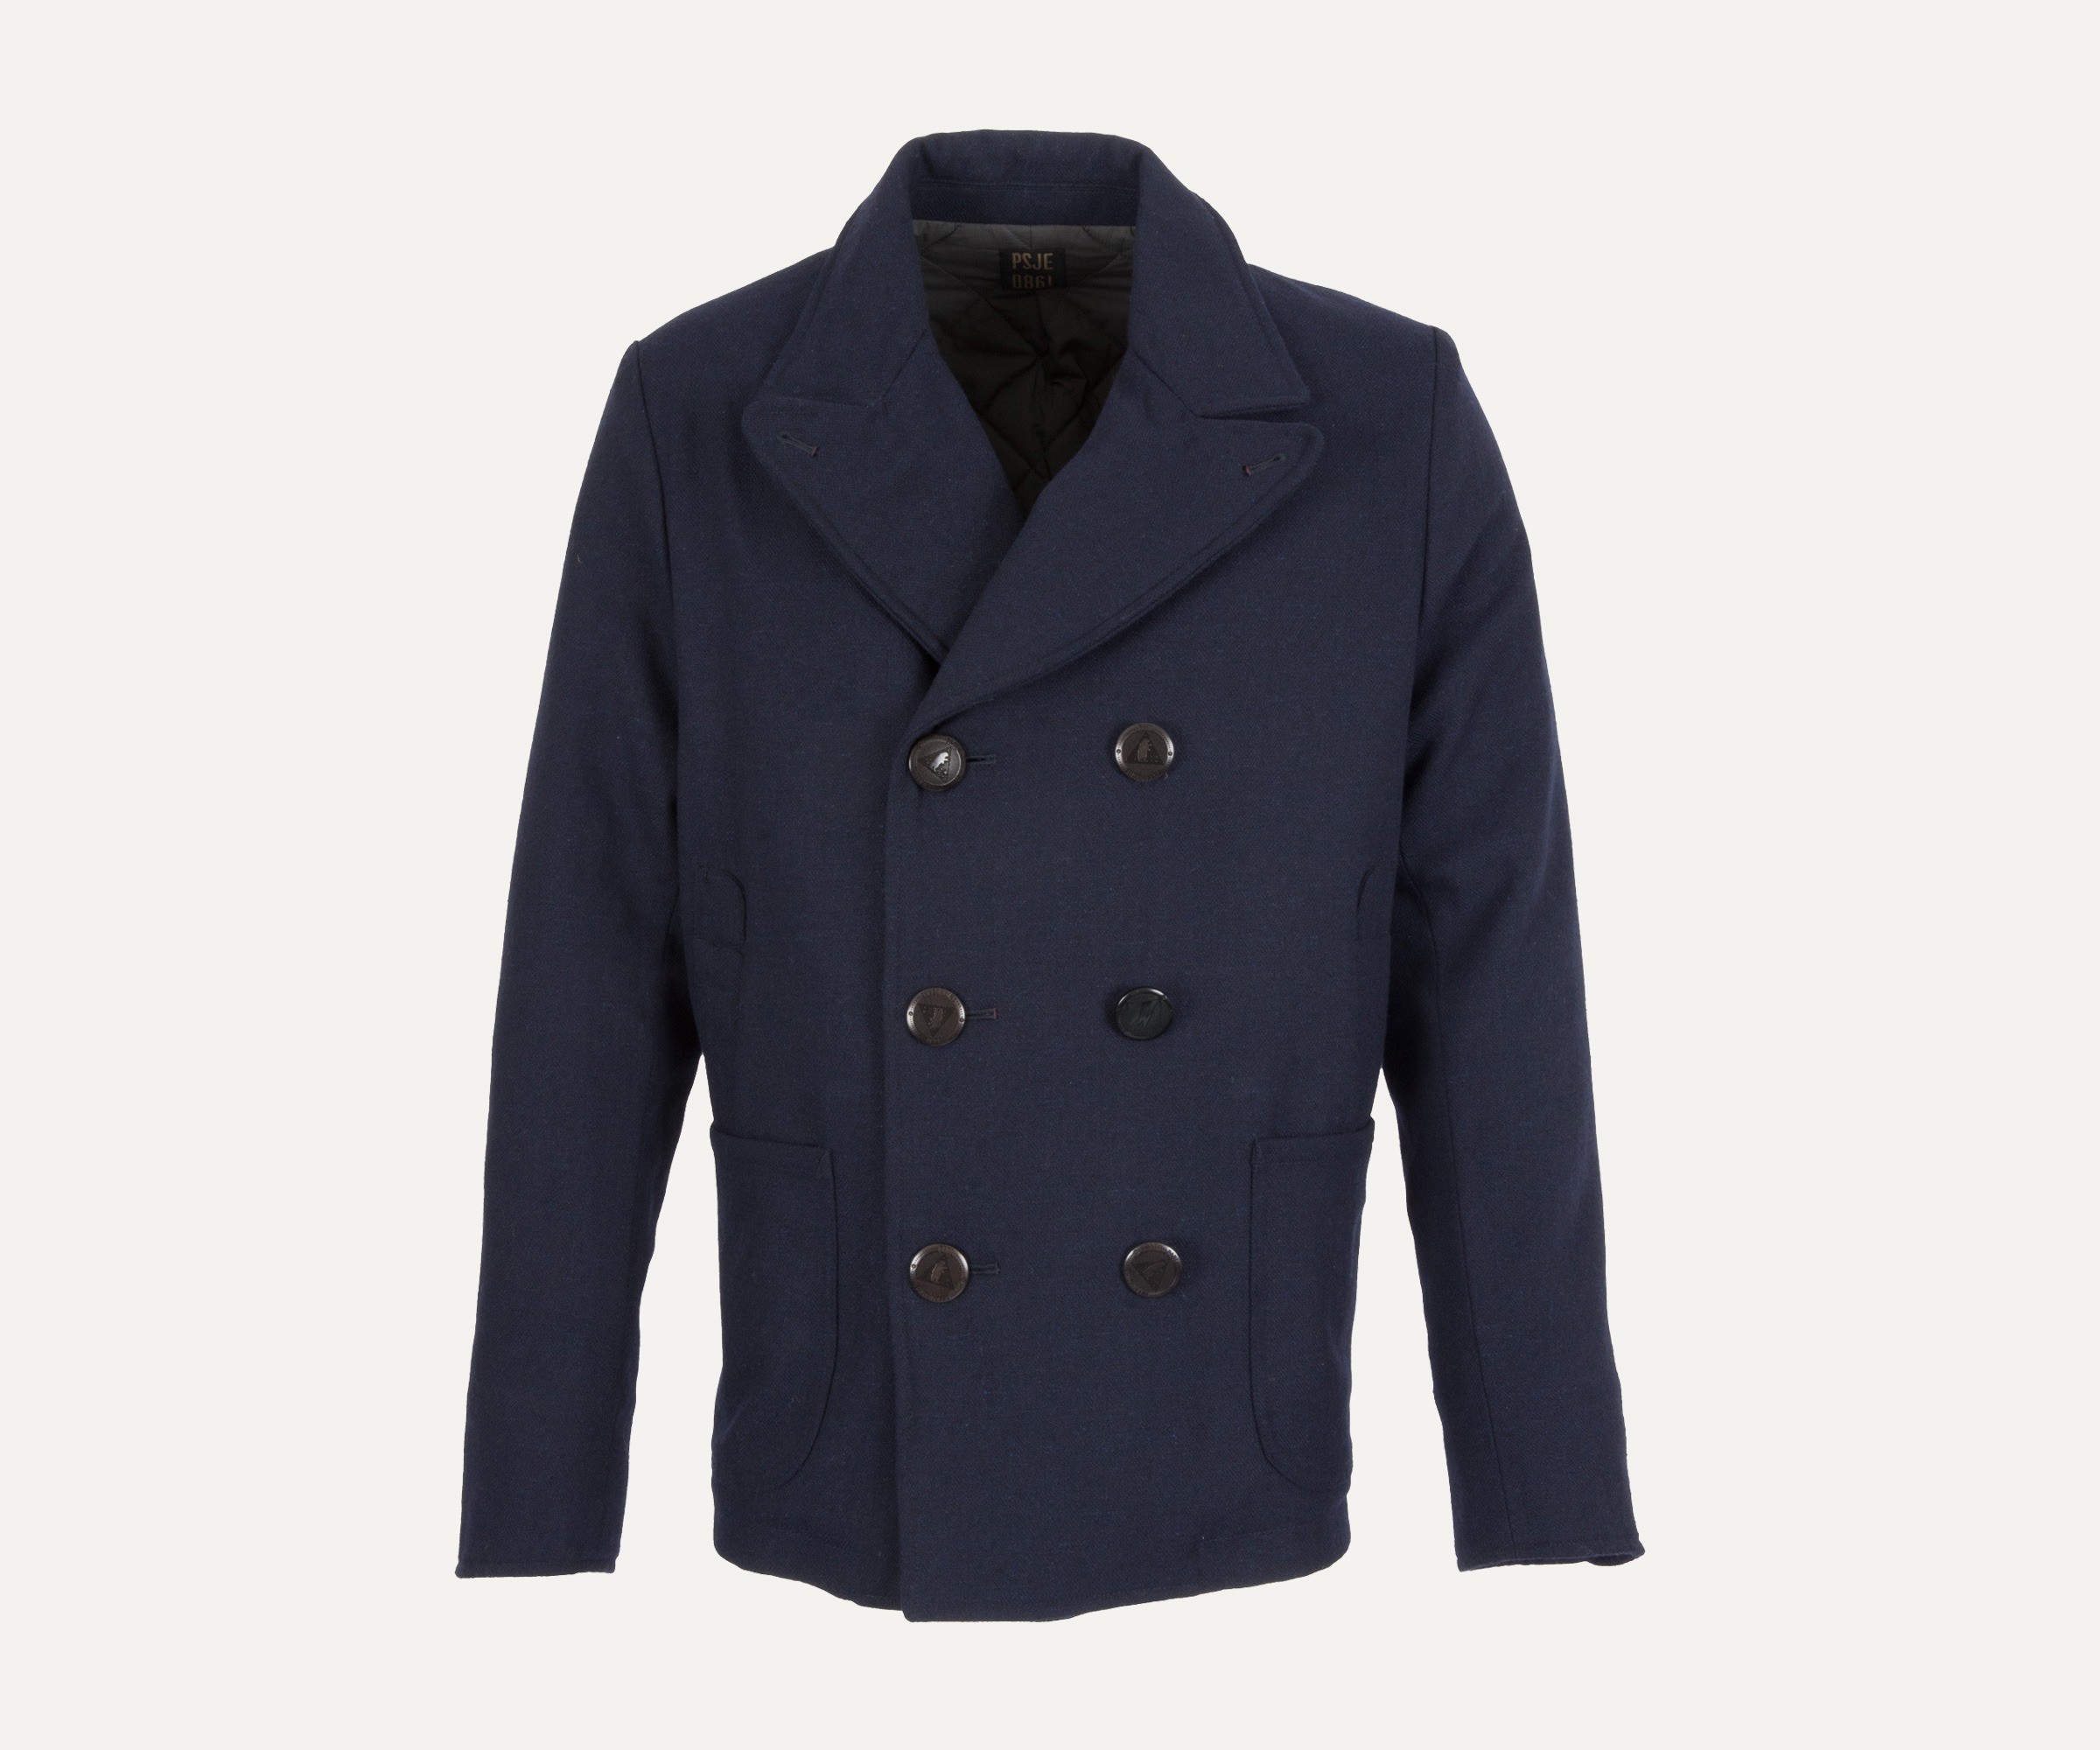 Paul Smith Jeans Double Breasted Pea Coat Navy